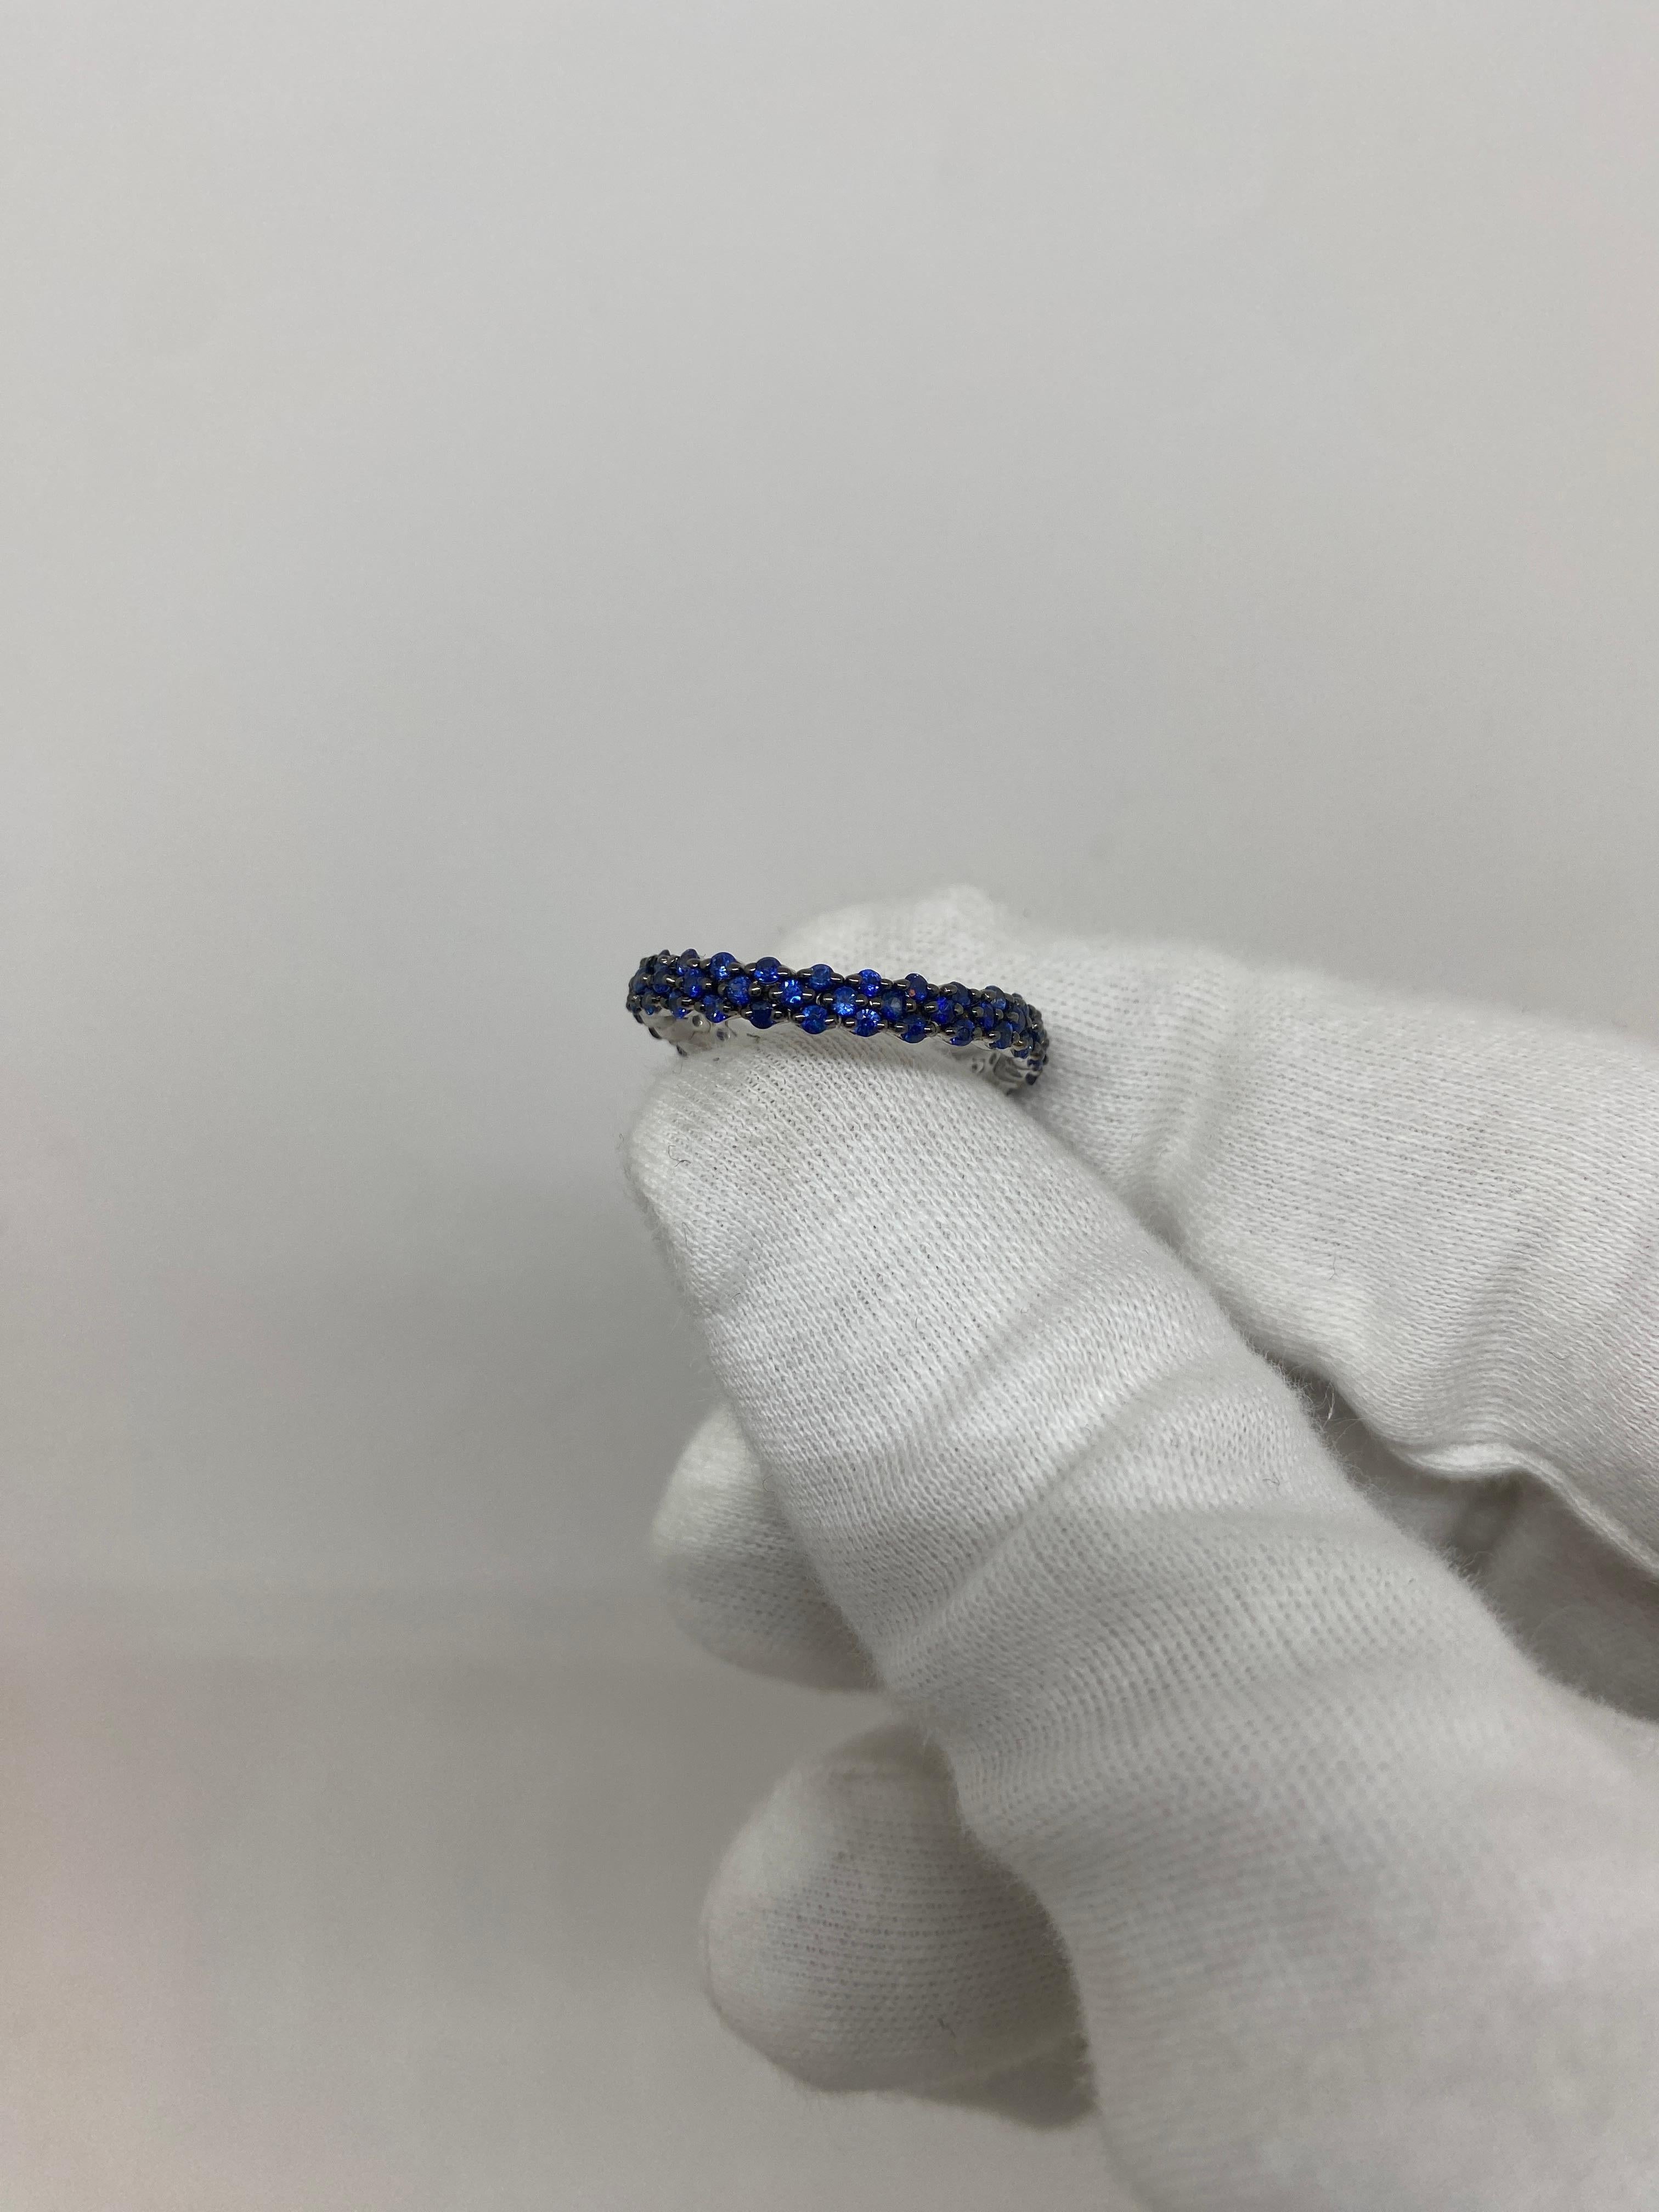 Brilliant Cut 18Kt White Gold Riviere Ring Blue Sapphires 1.29 ct For Sale